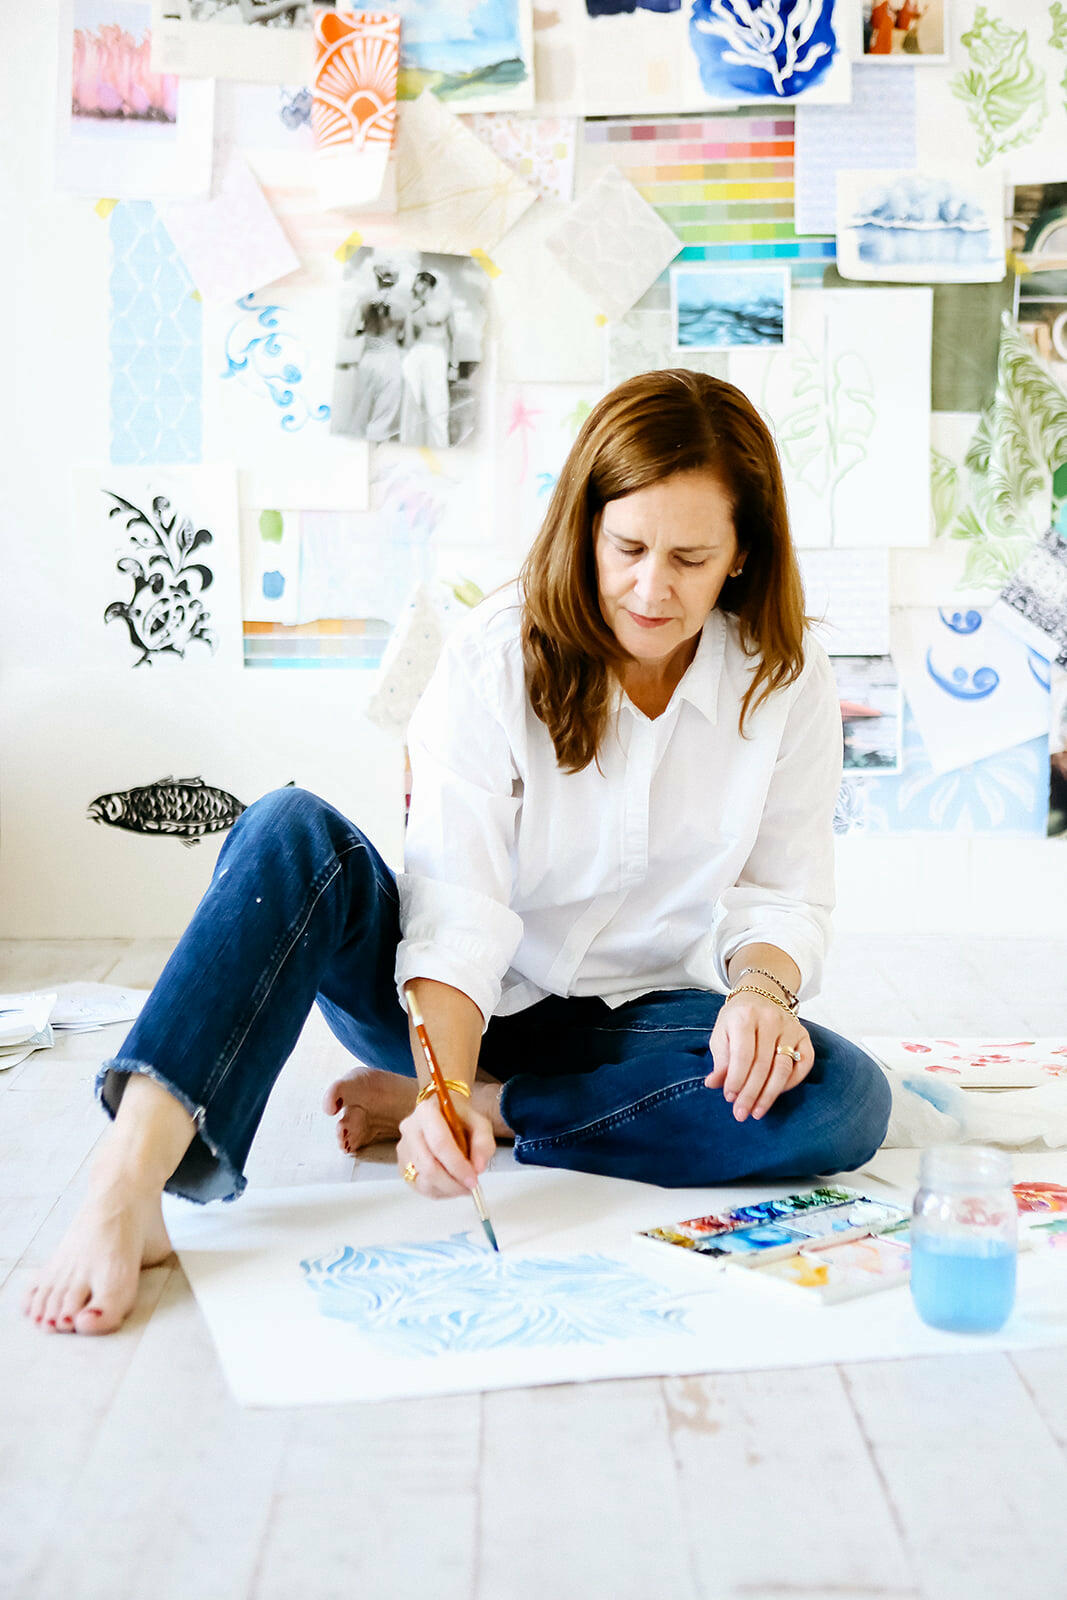 This self-taught textile designer paints patterns inspired by her seafaring travels